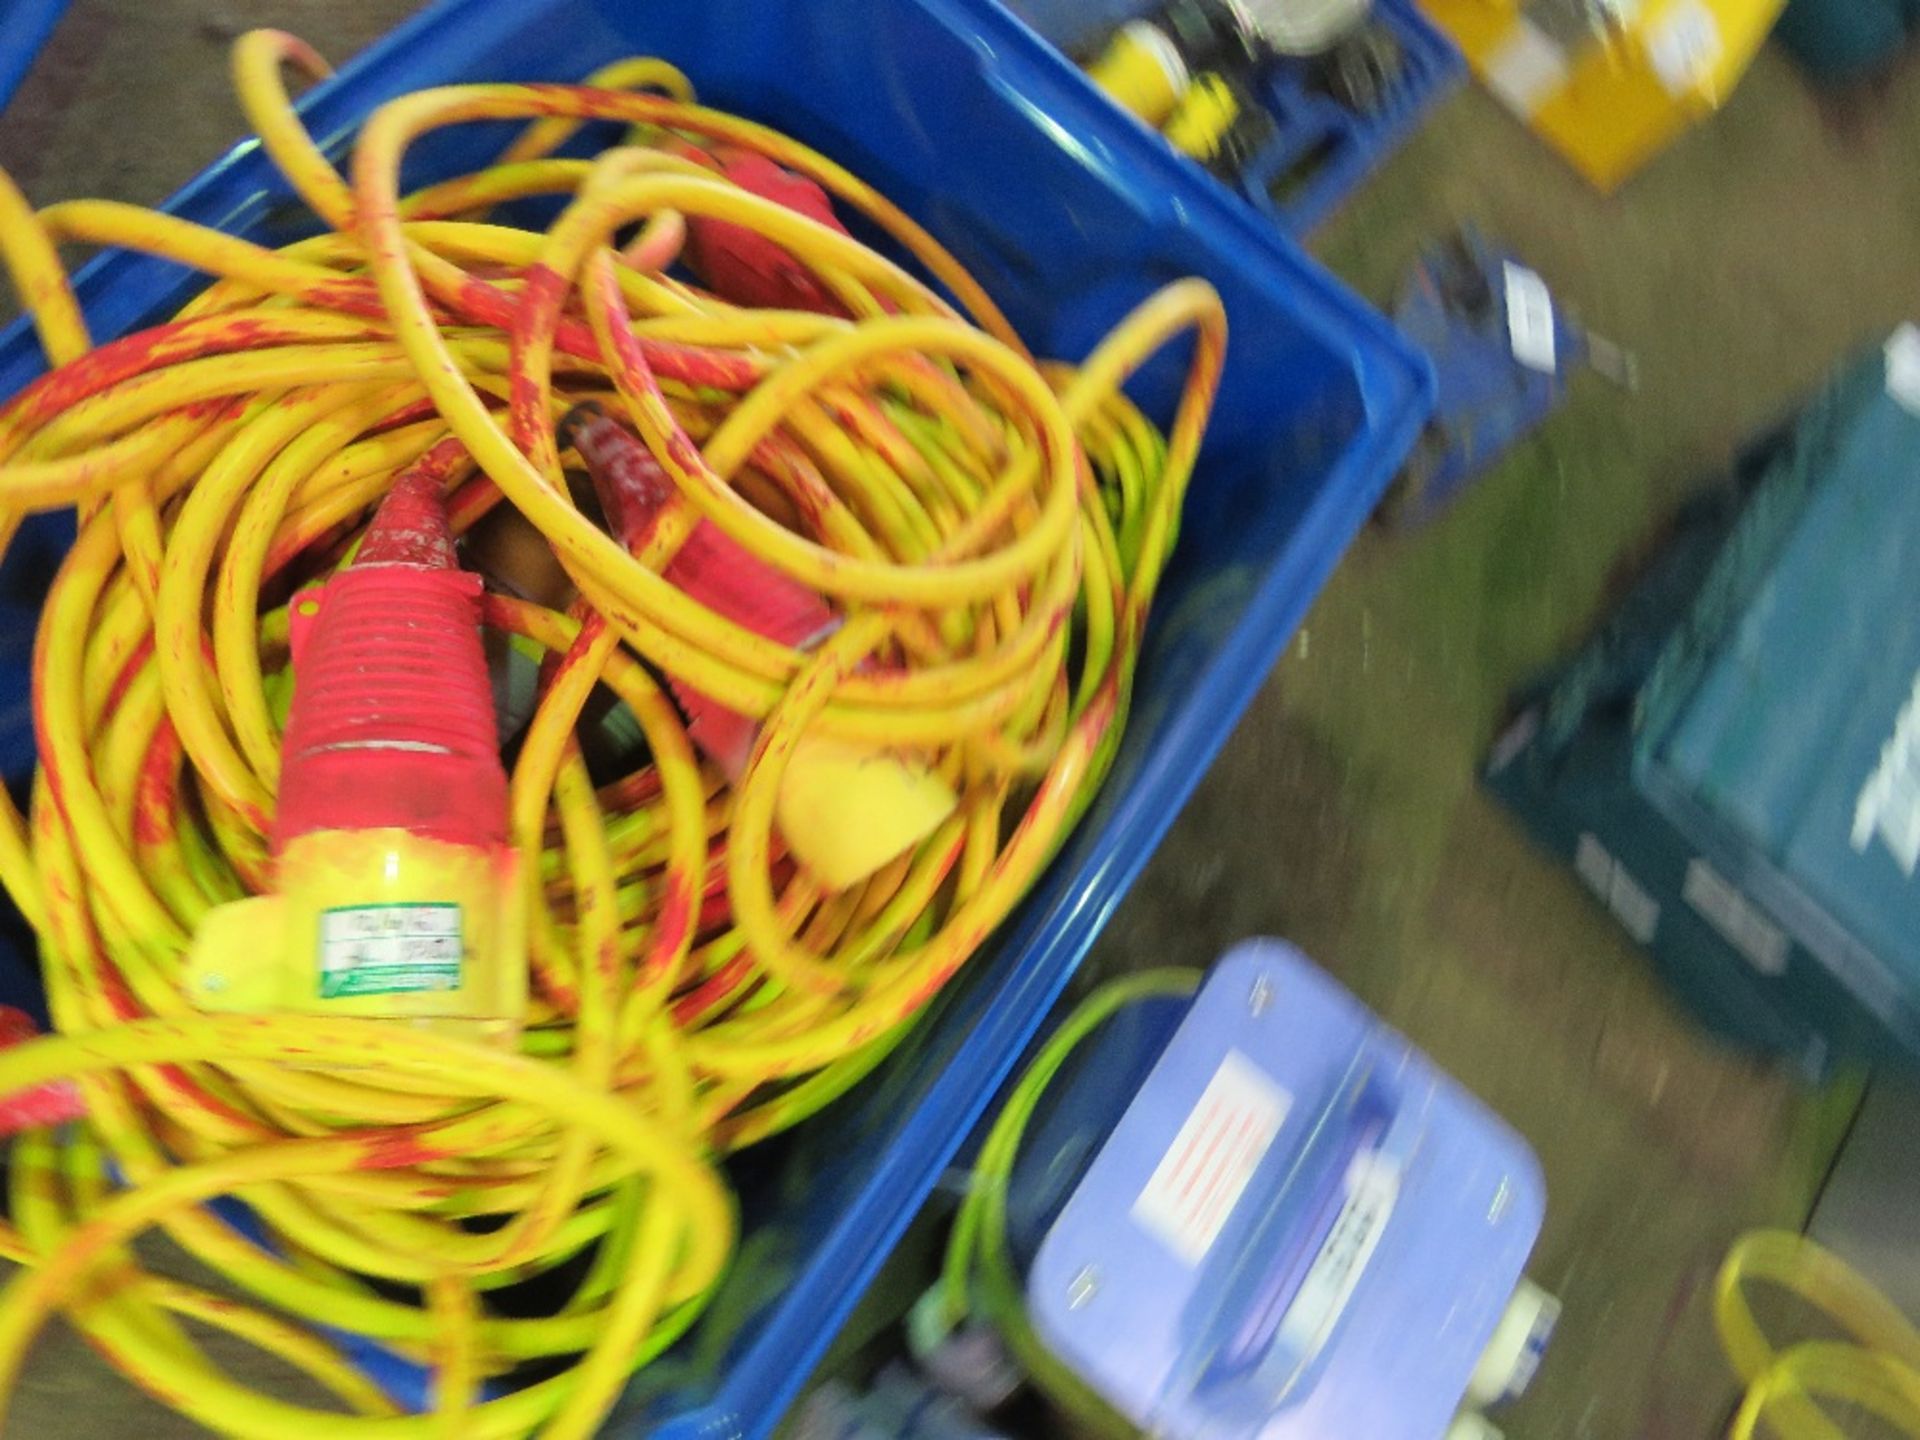 2 X CRATES CONTAINING LARGE OUTPUT 110VOLT LEADS. SOURCED FROM LOCAL BUILDING COMPANY LIQUIDATION. - Image 5 of 5